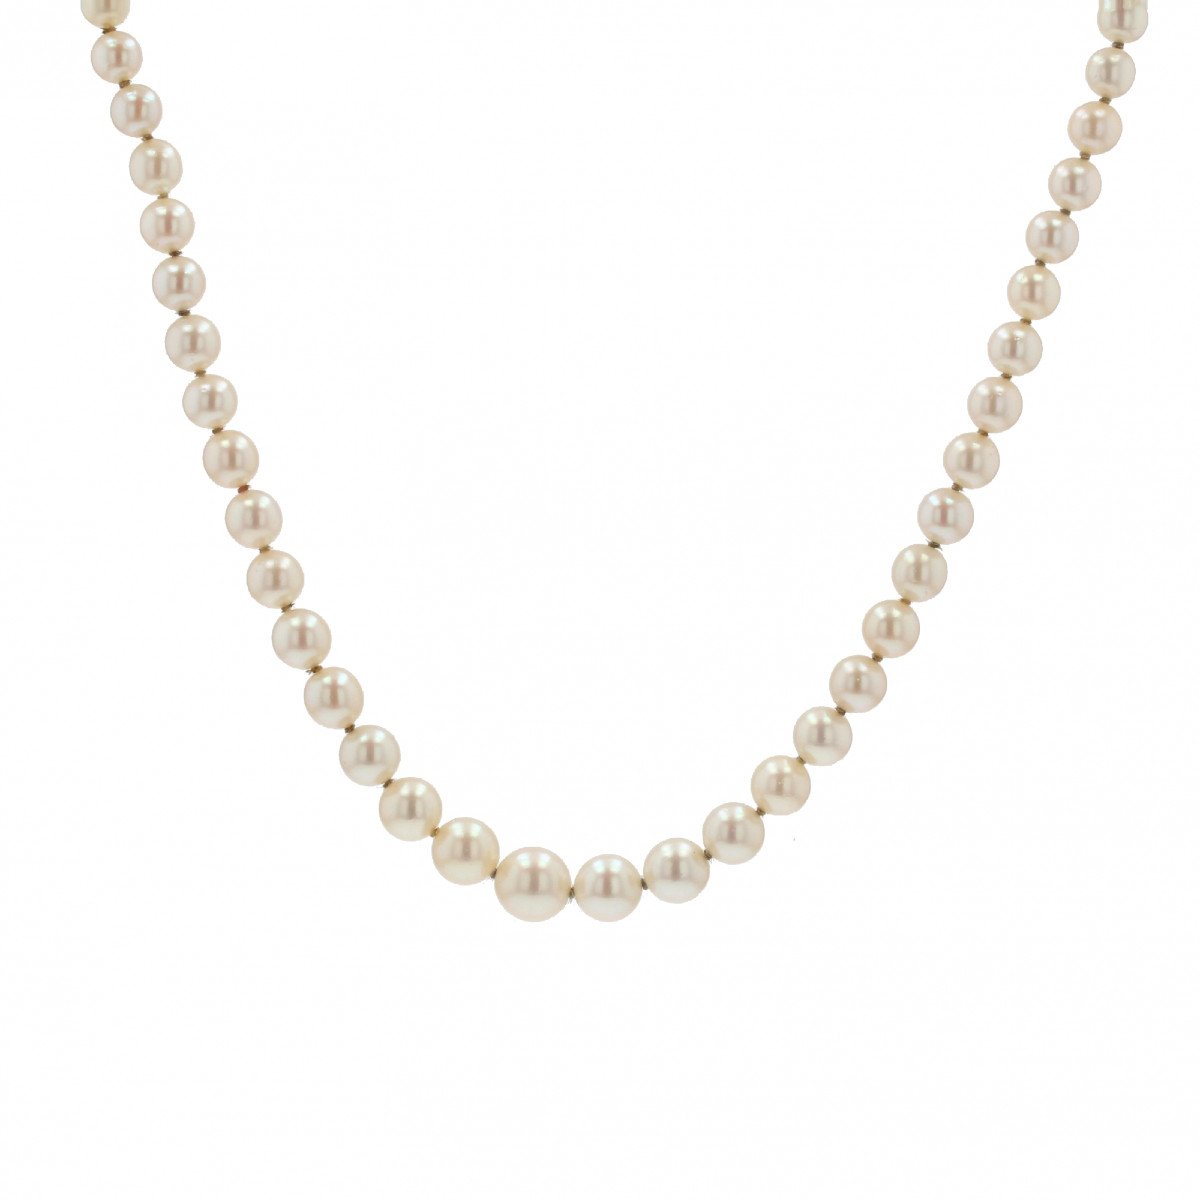 Falling Cultured Pearl Necklace